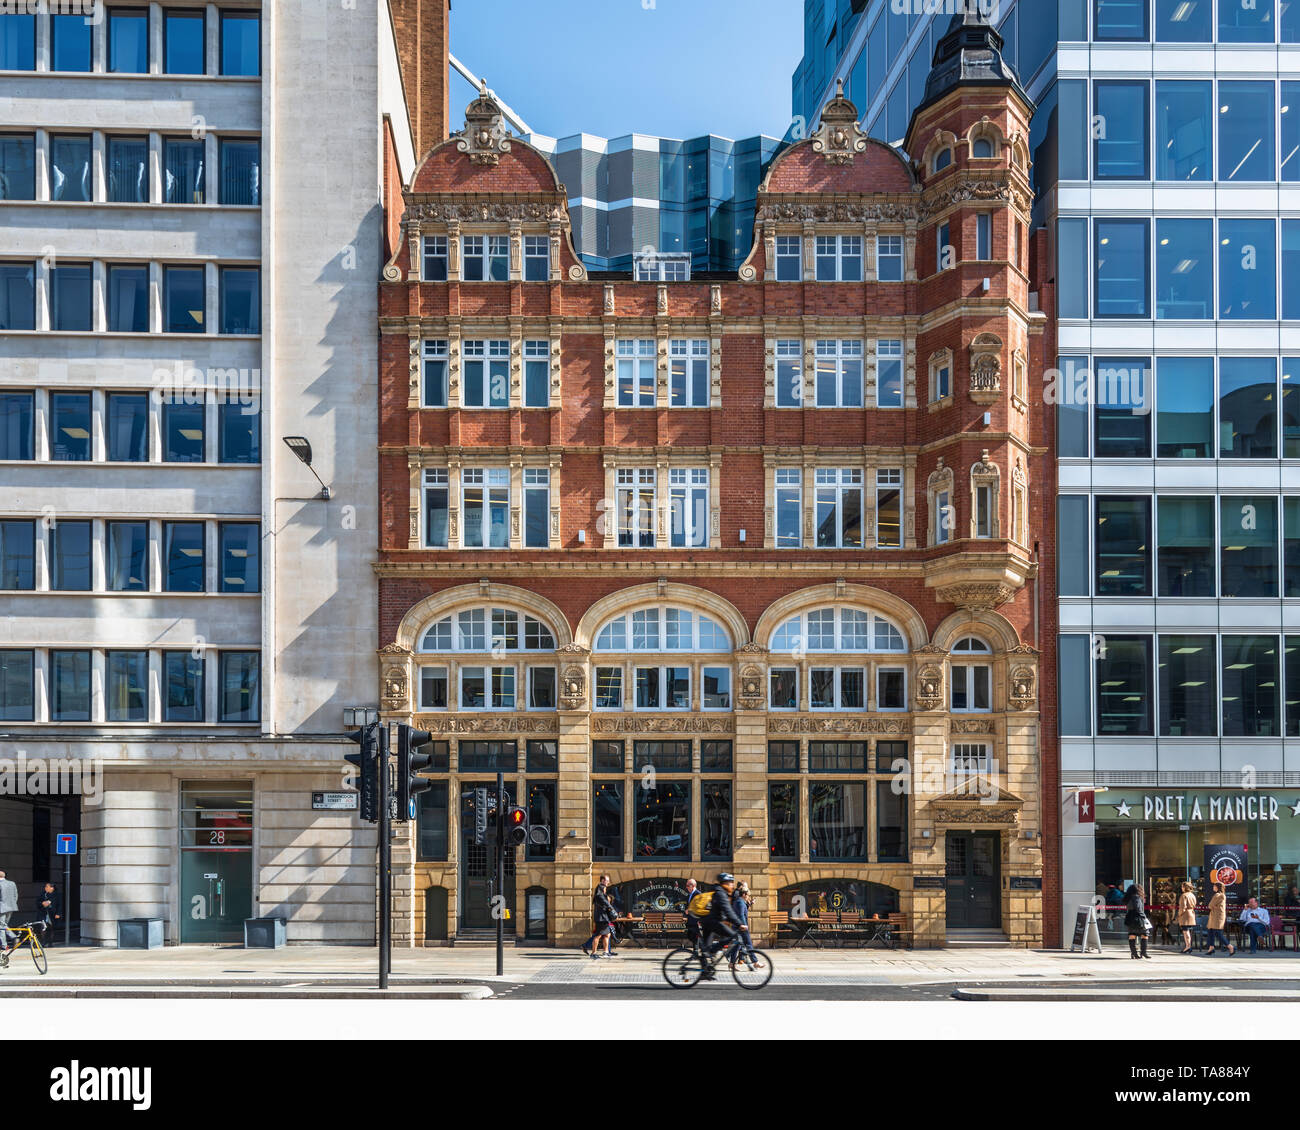 Period building sandwiched between 2 contemporary buildings, London, UK Stock Photo